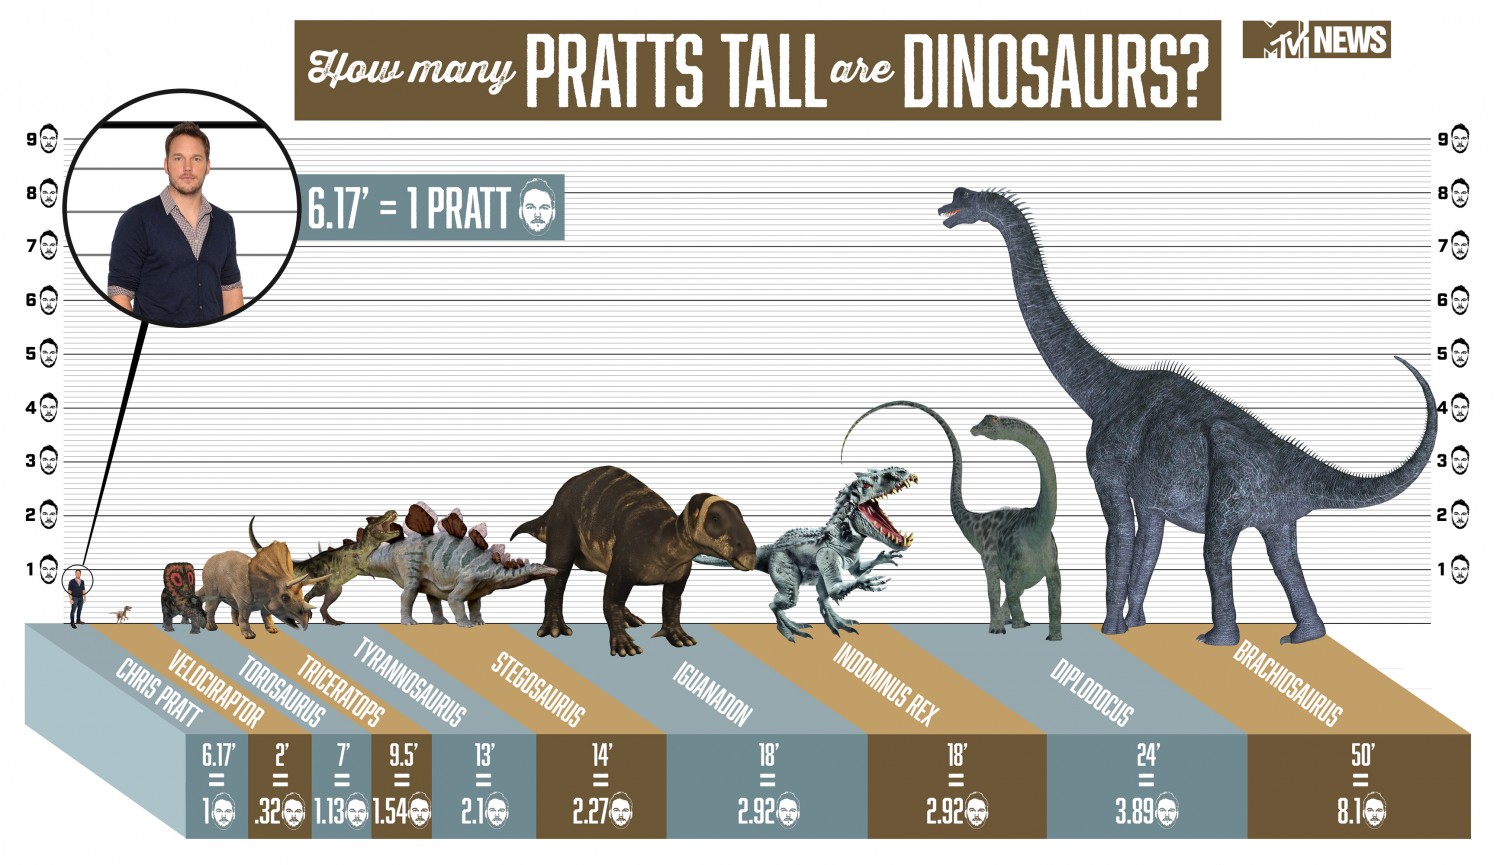 how-many-pratts-tall-are-dinosaurs_55884a02db23a_w1500.jpg